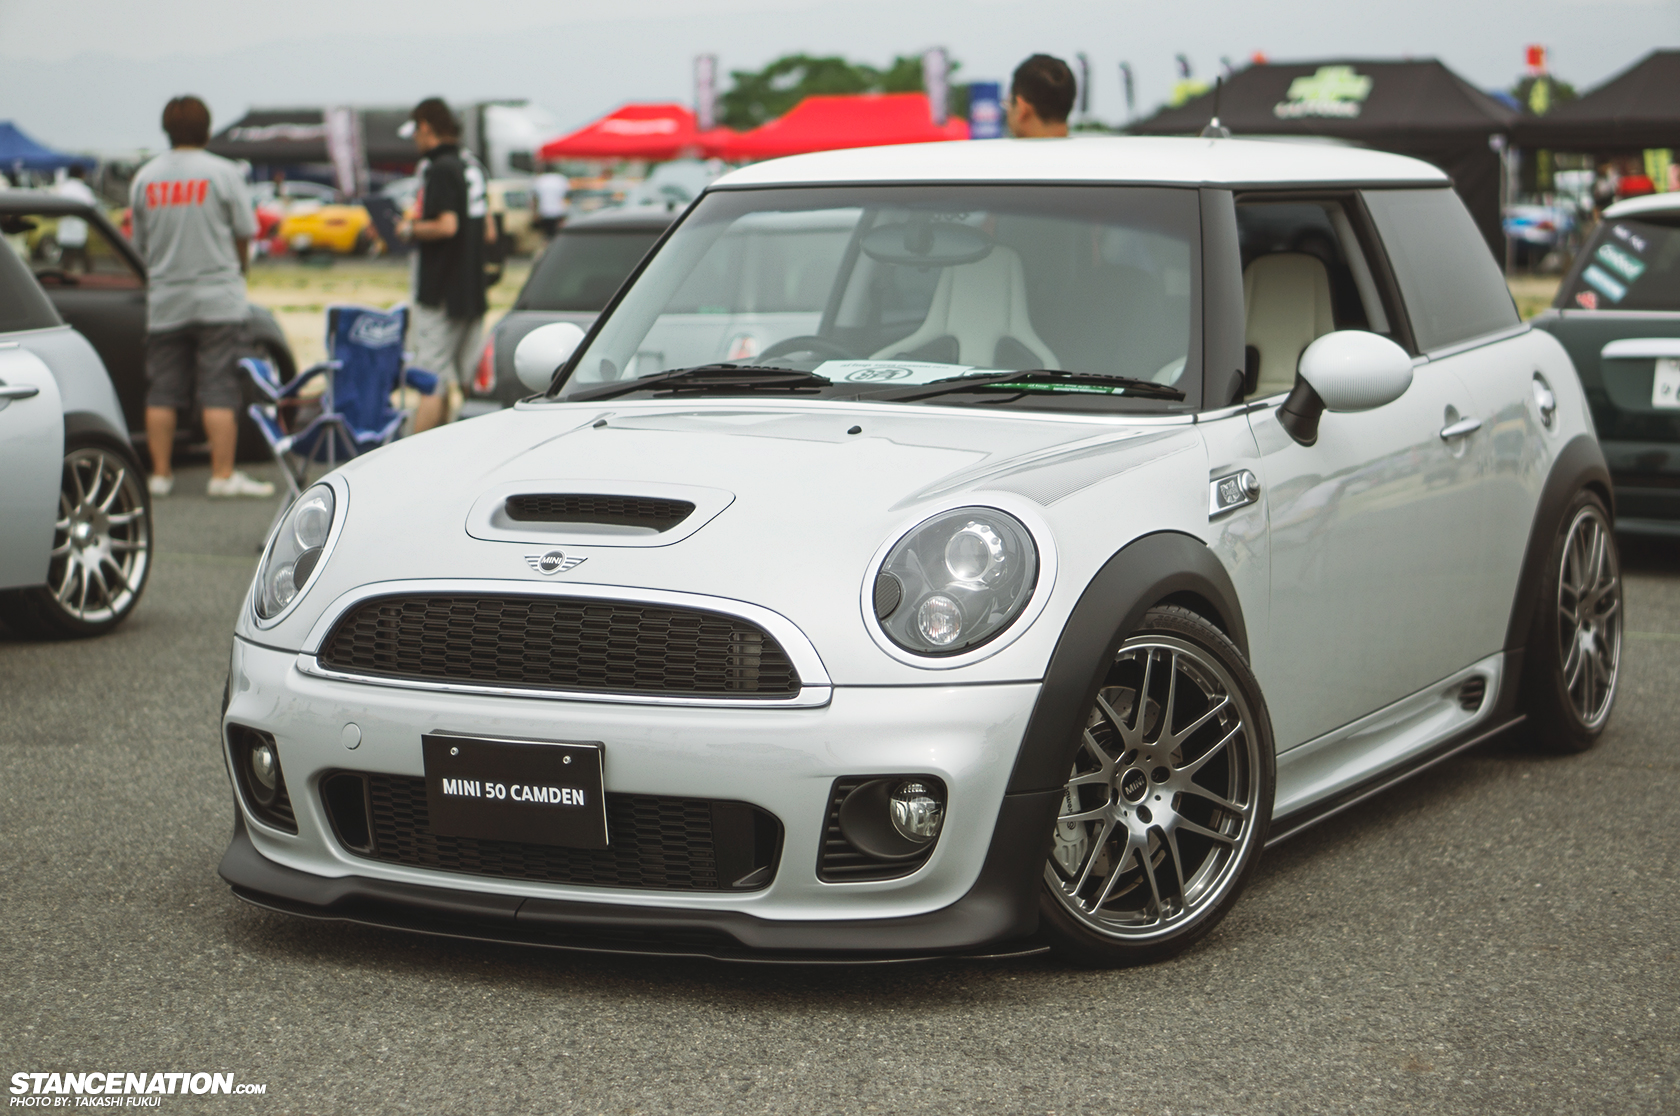 Meanest looking Cooper? Pics please - Page 17 - North American Motoring